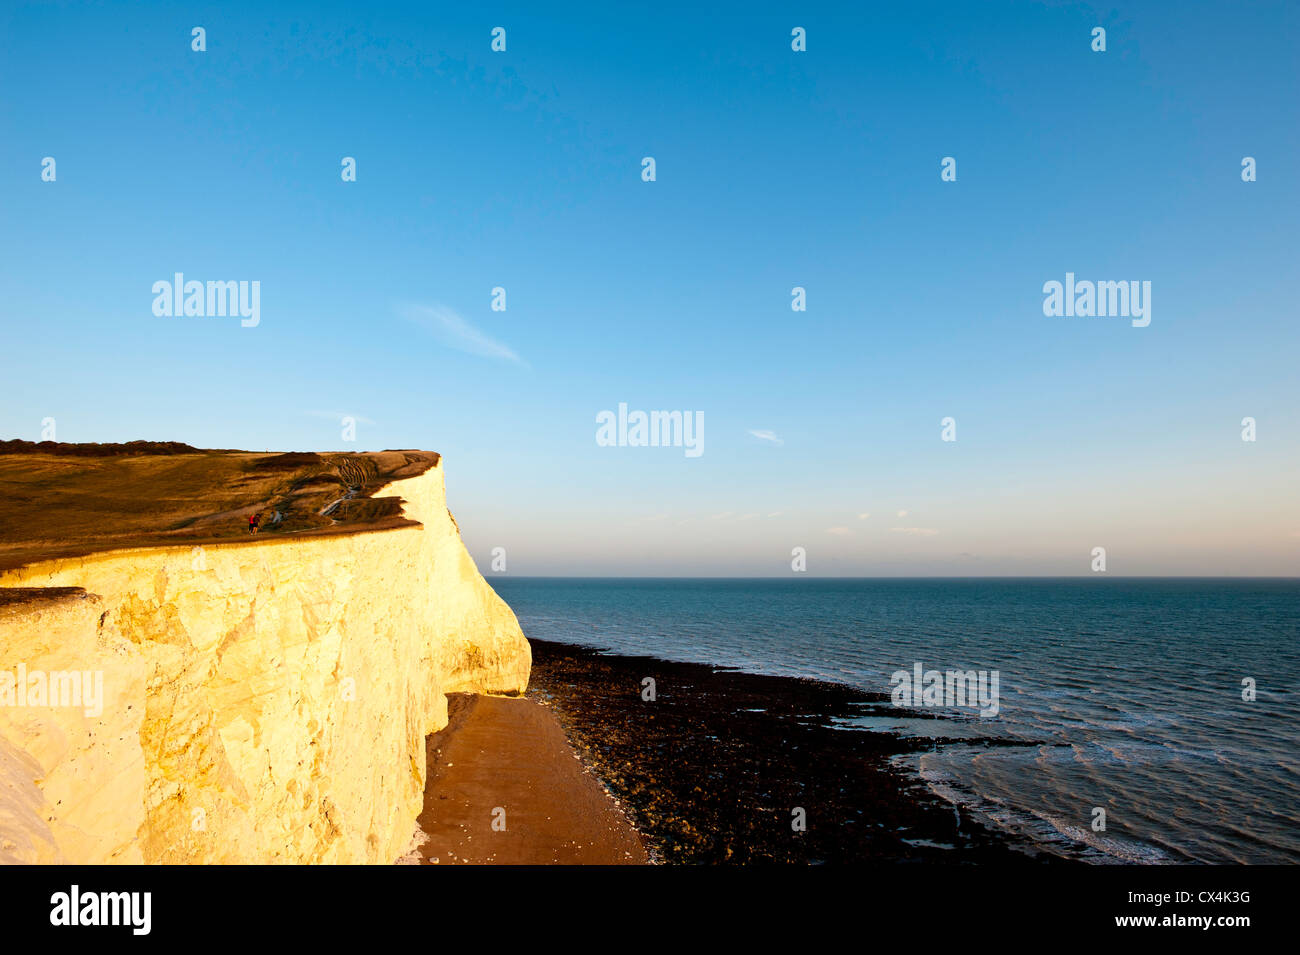 Cliffs overlooking English Channel, Seaford, East Sussex, United Kingdom Stock Photo